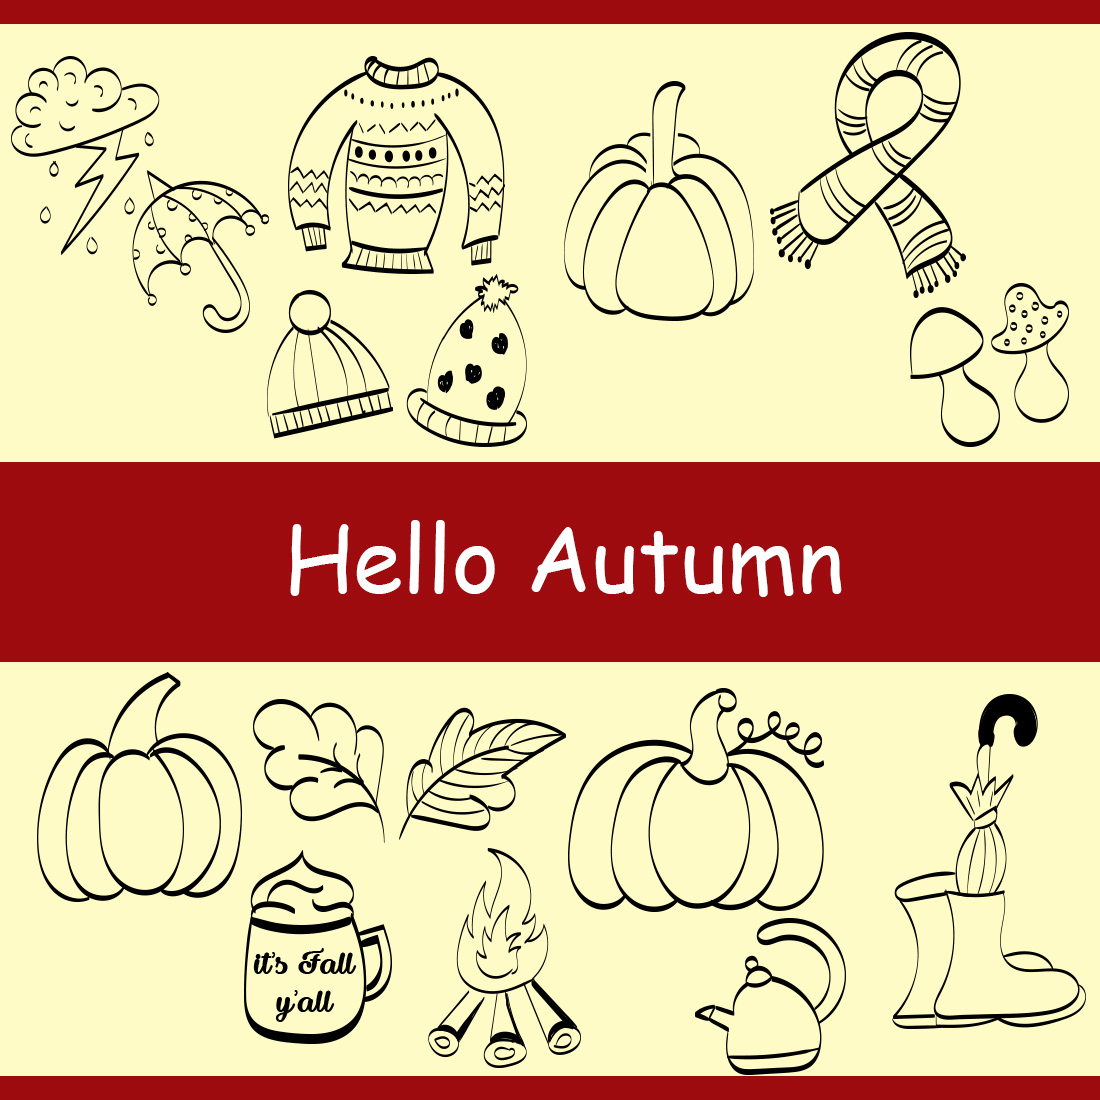 Autumn Greeting Card Design cover image.